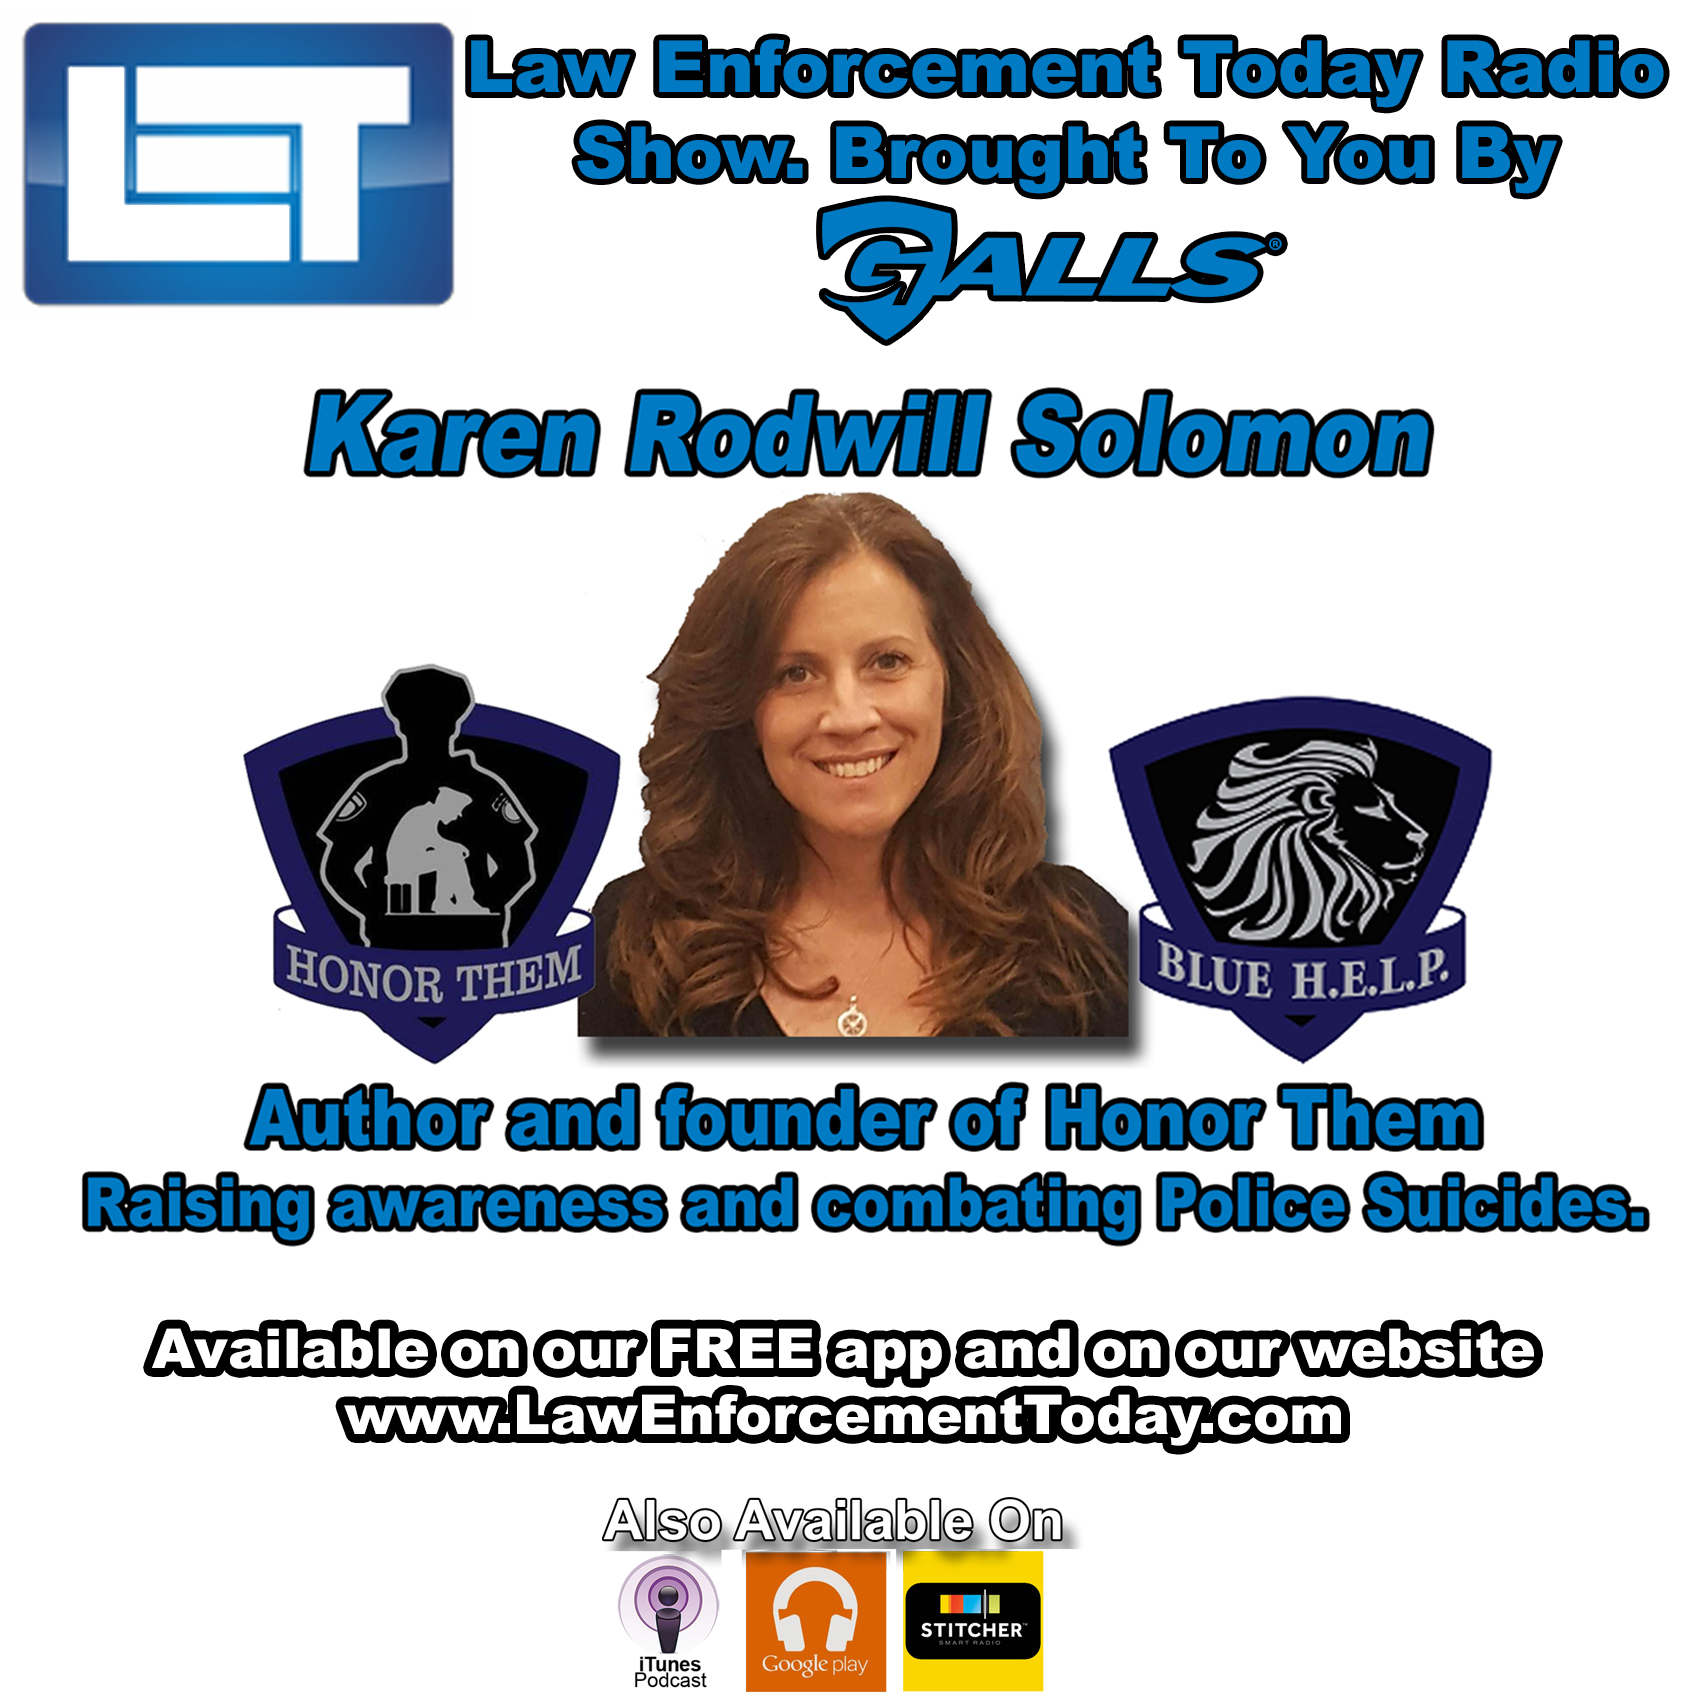 S1E25: Combating Police Suicides And Raising Awareness With Karen Rodwill Solomon